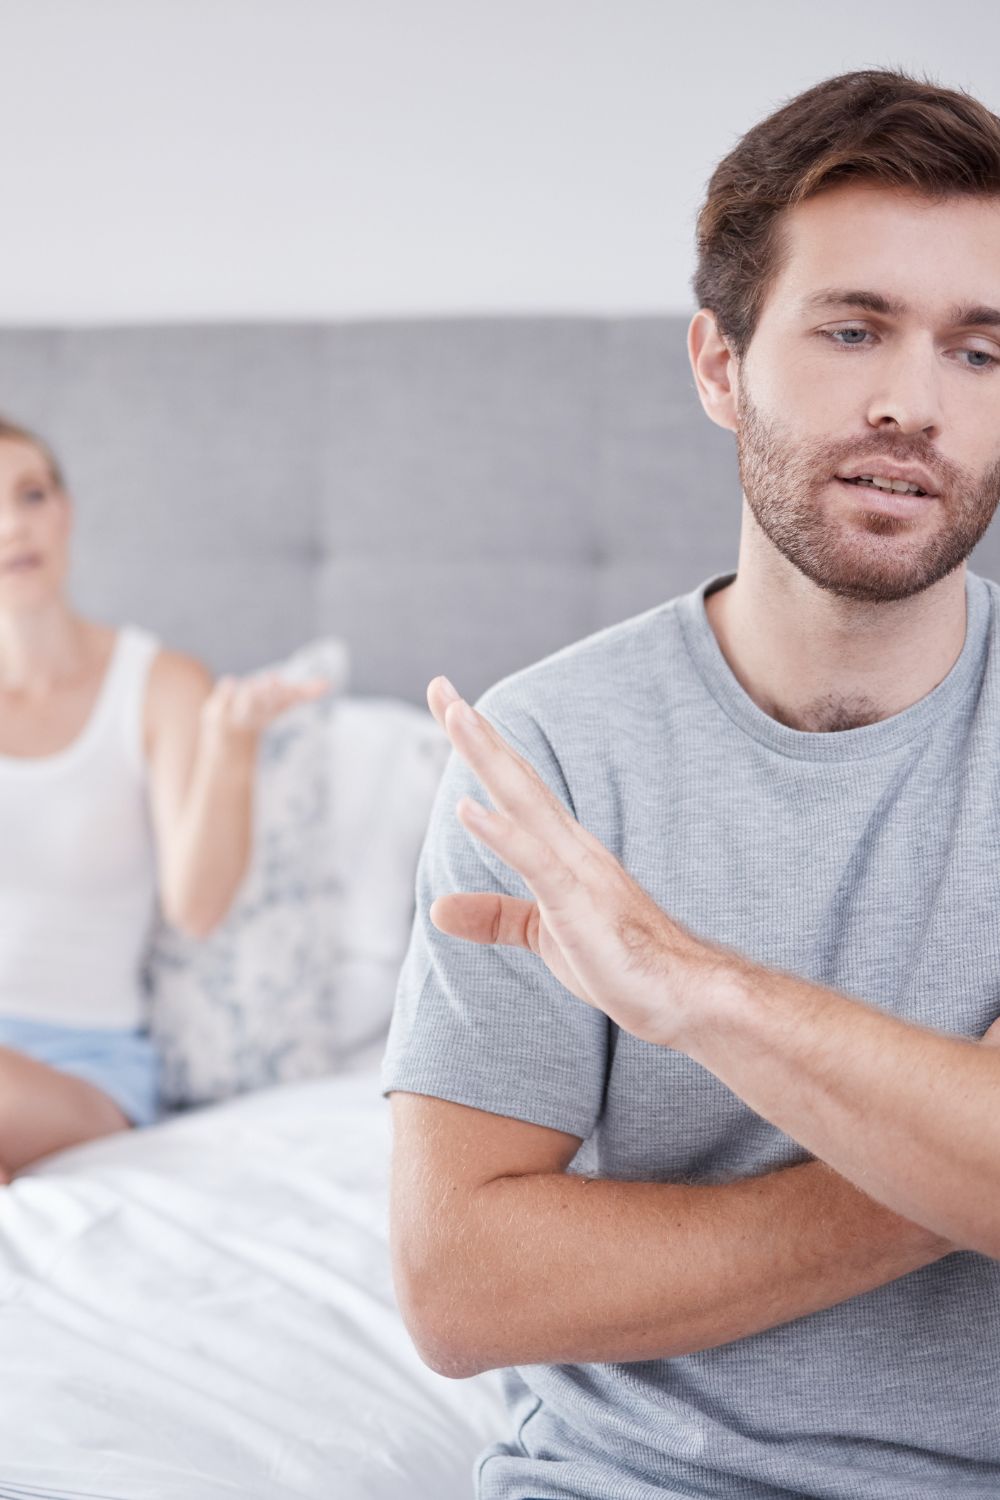 What does it mean if your husband rejects you sexually?